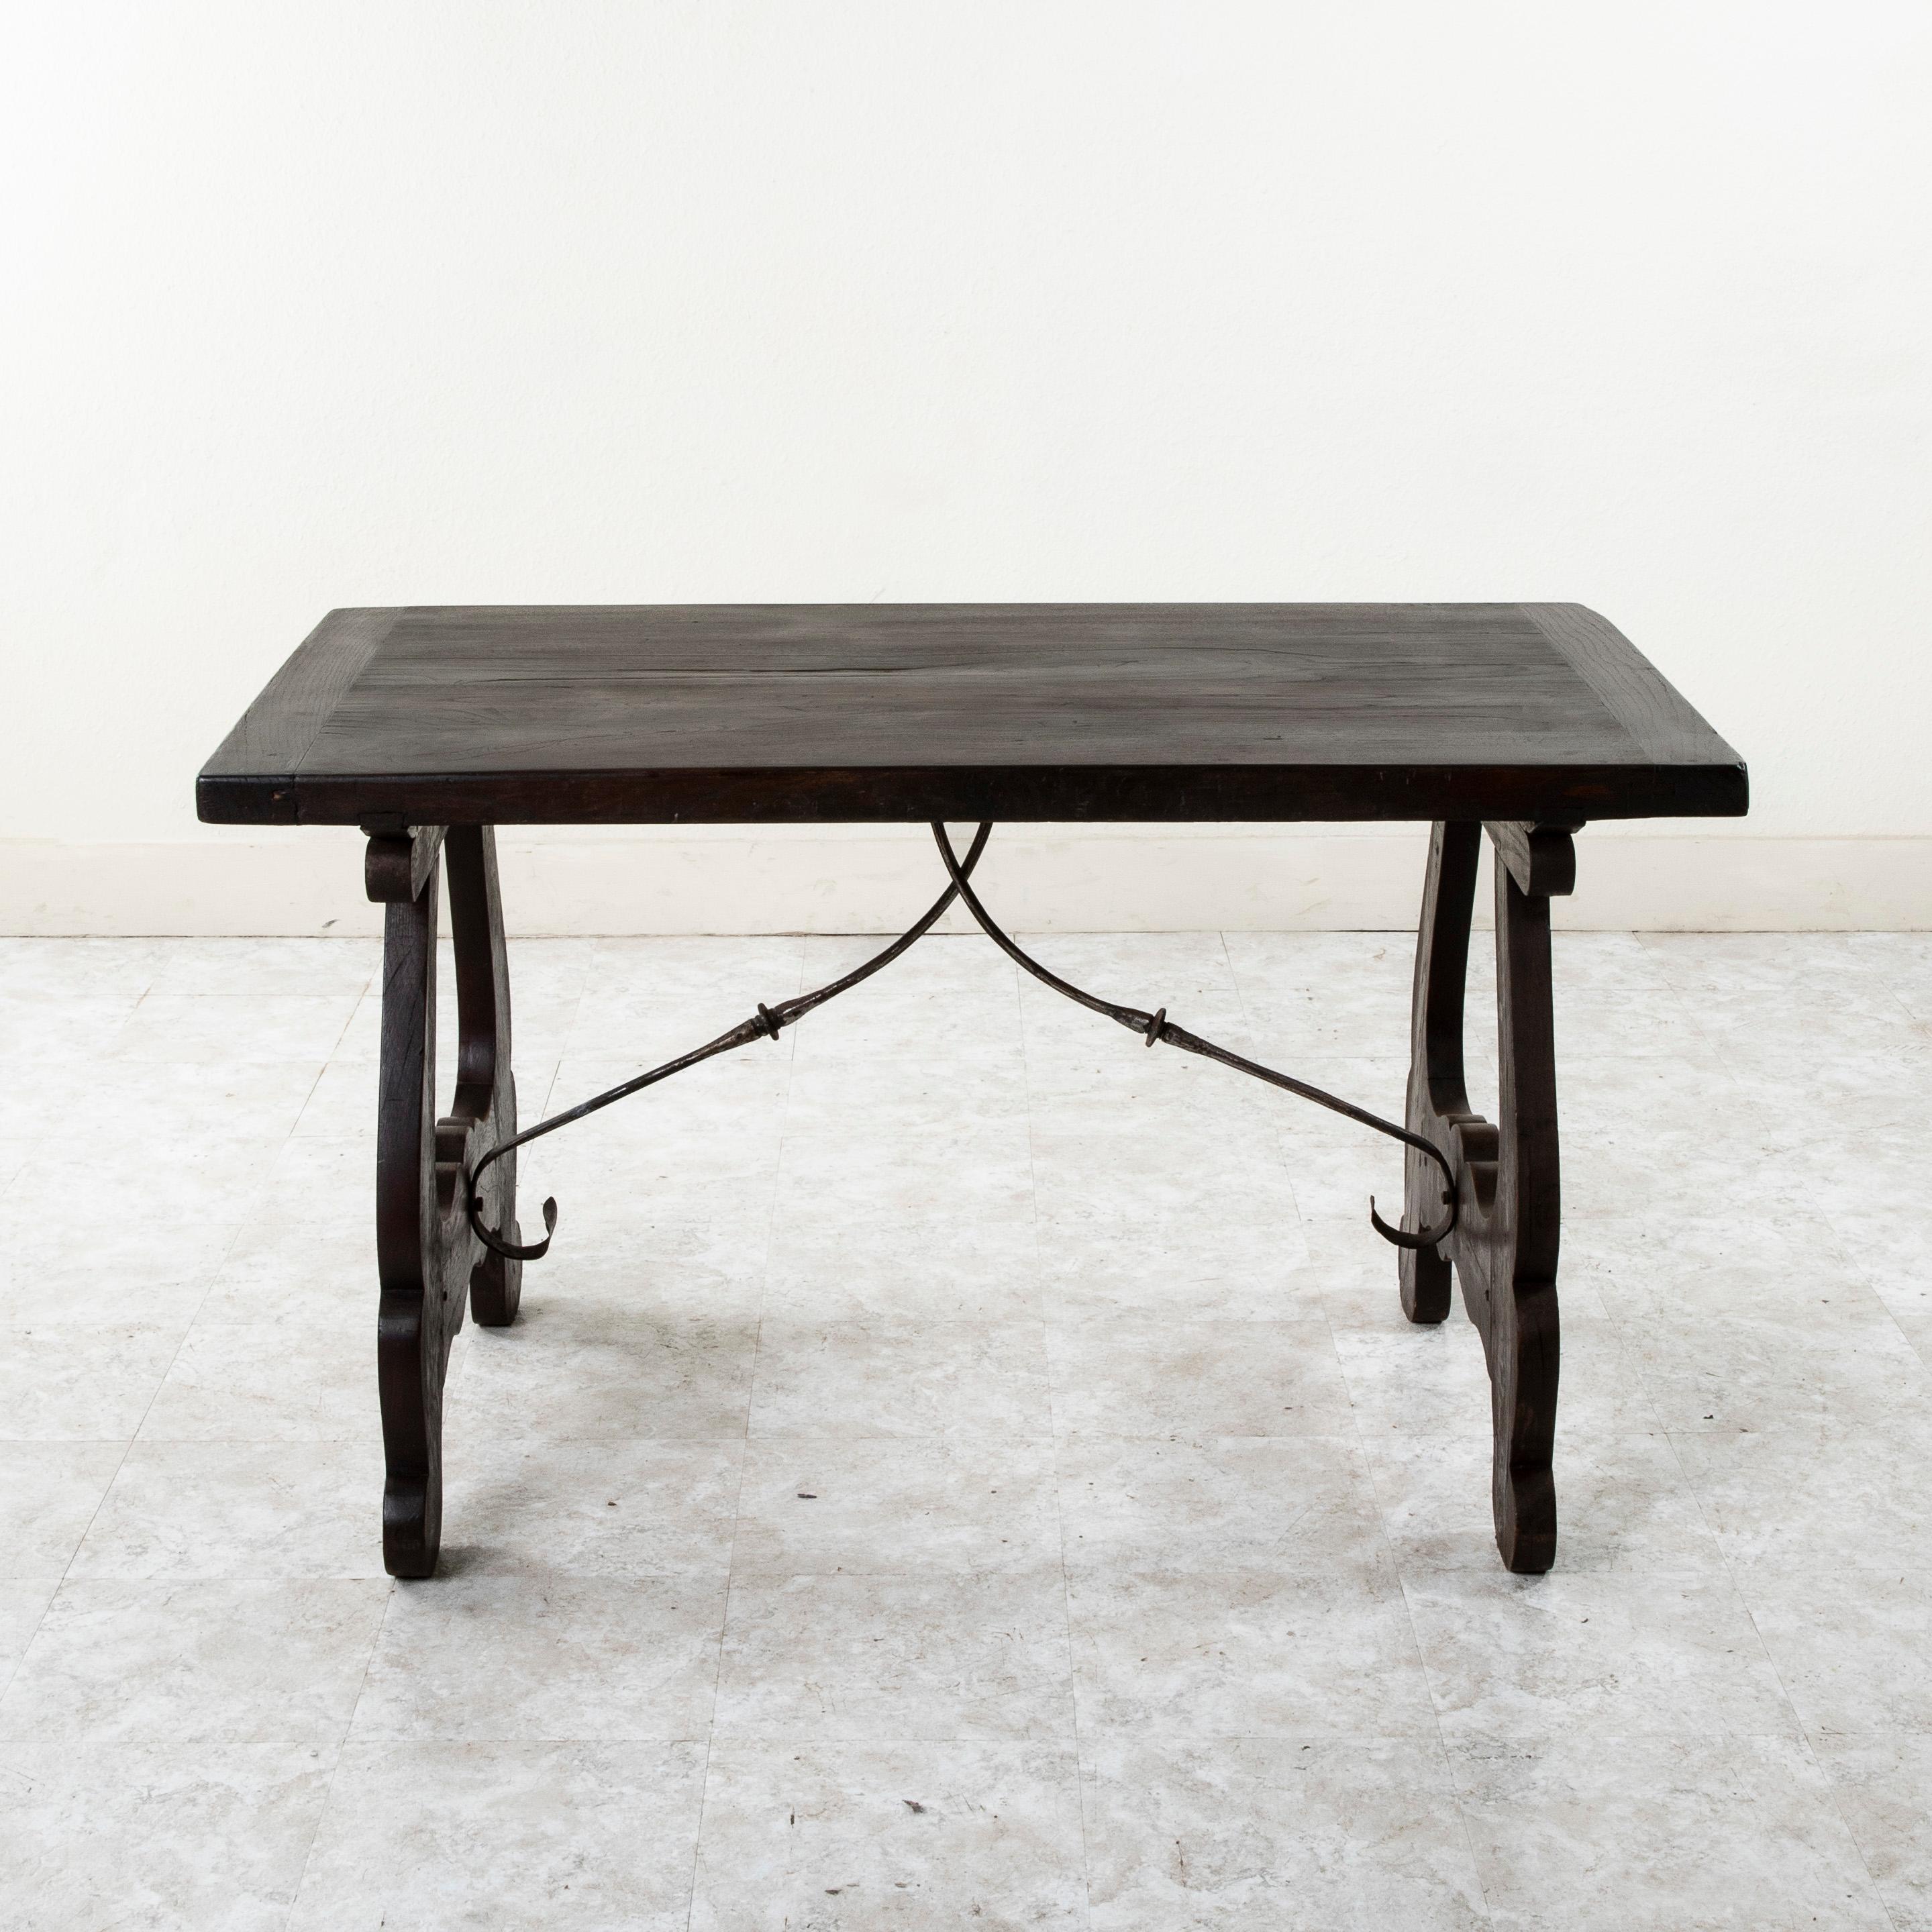 This small scale late nineteenth century Spanish Renaissance style table features a 29-inch wide oak top joined to its elegantly curved legs by means of two splines that run the entire width of the table. Hand forged iron supports connecting the